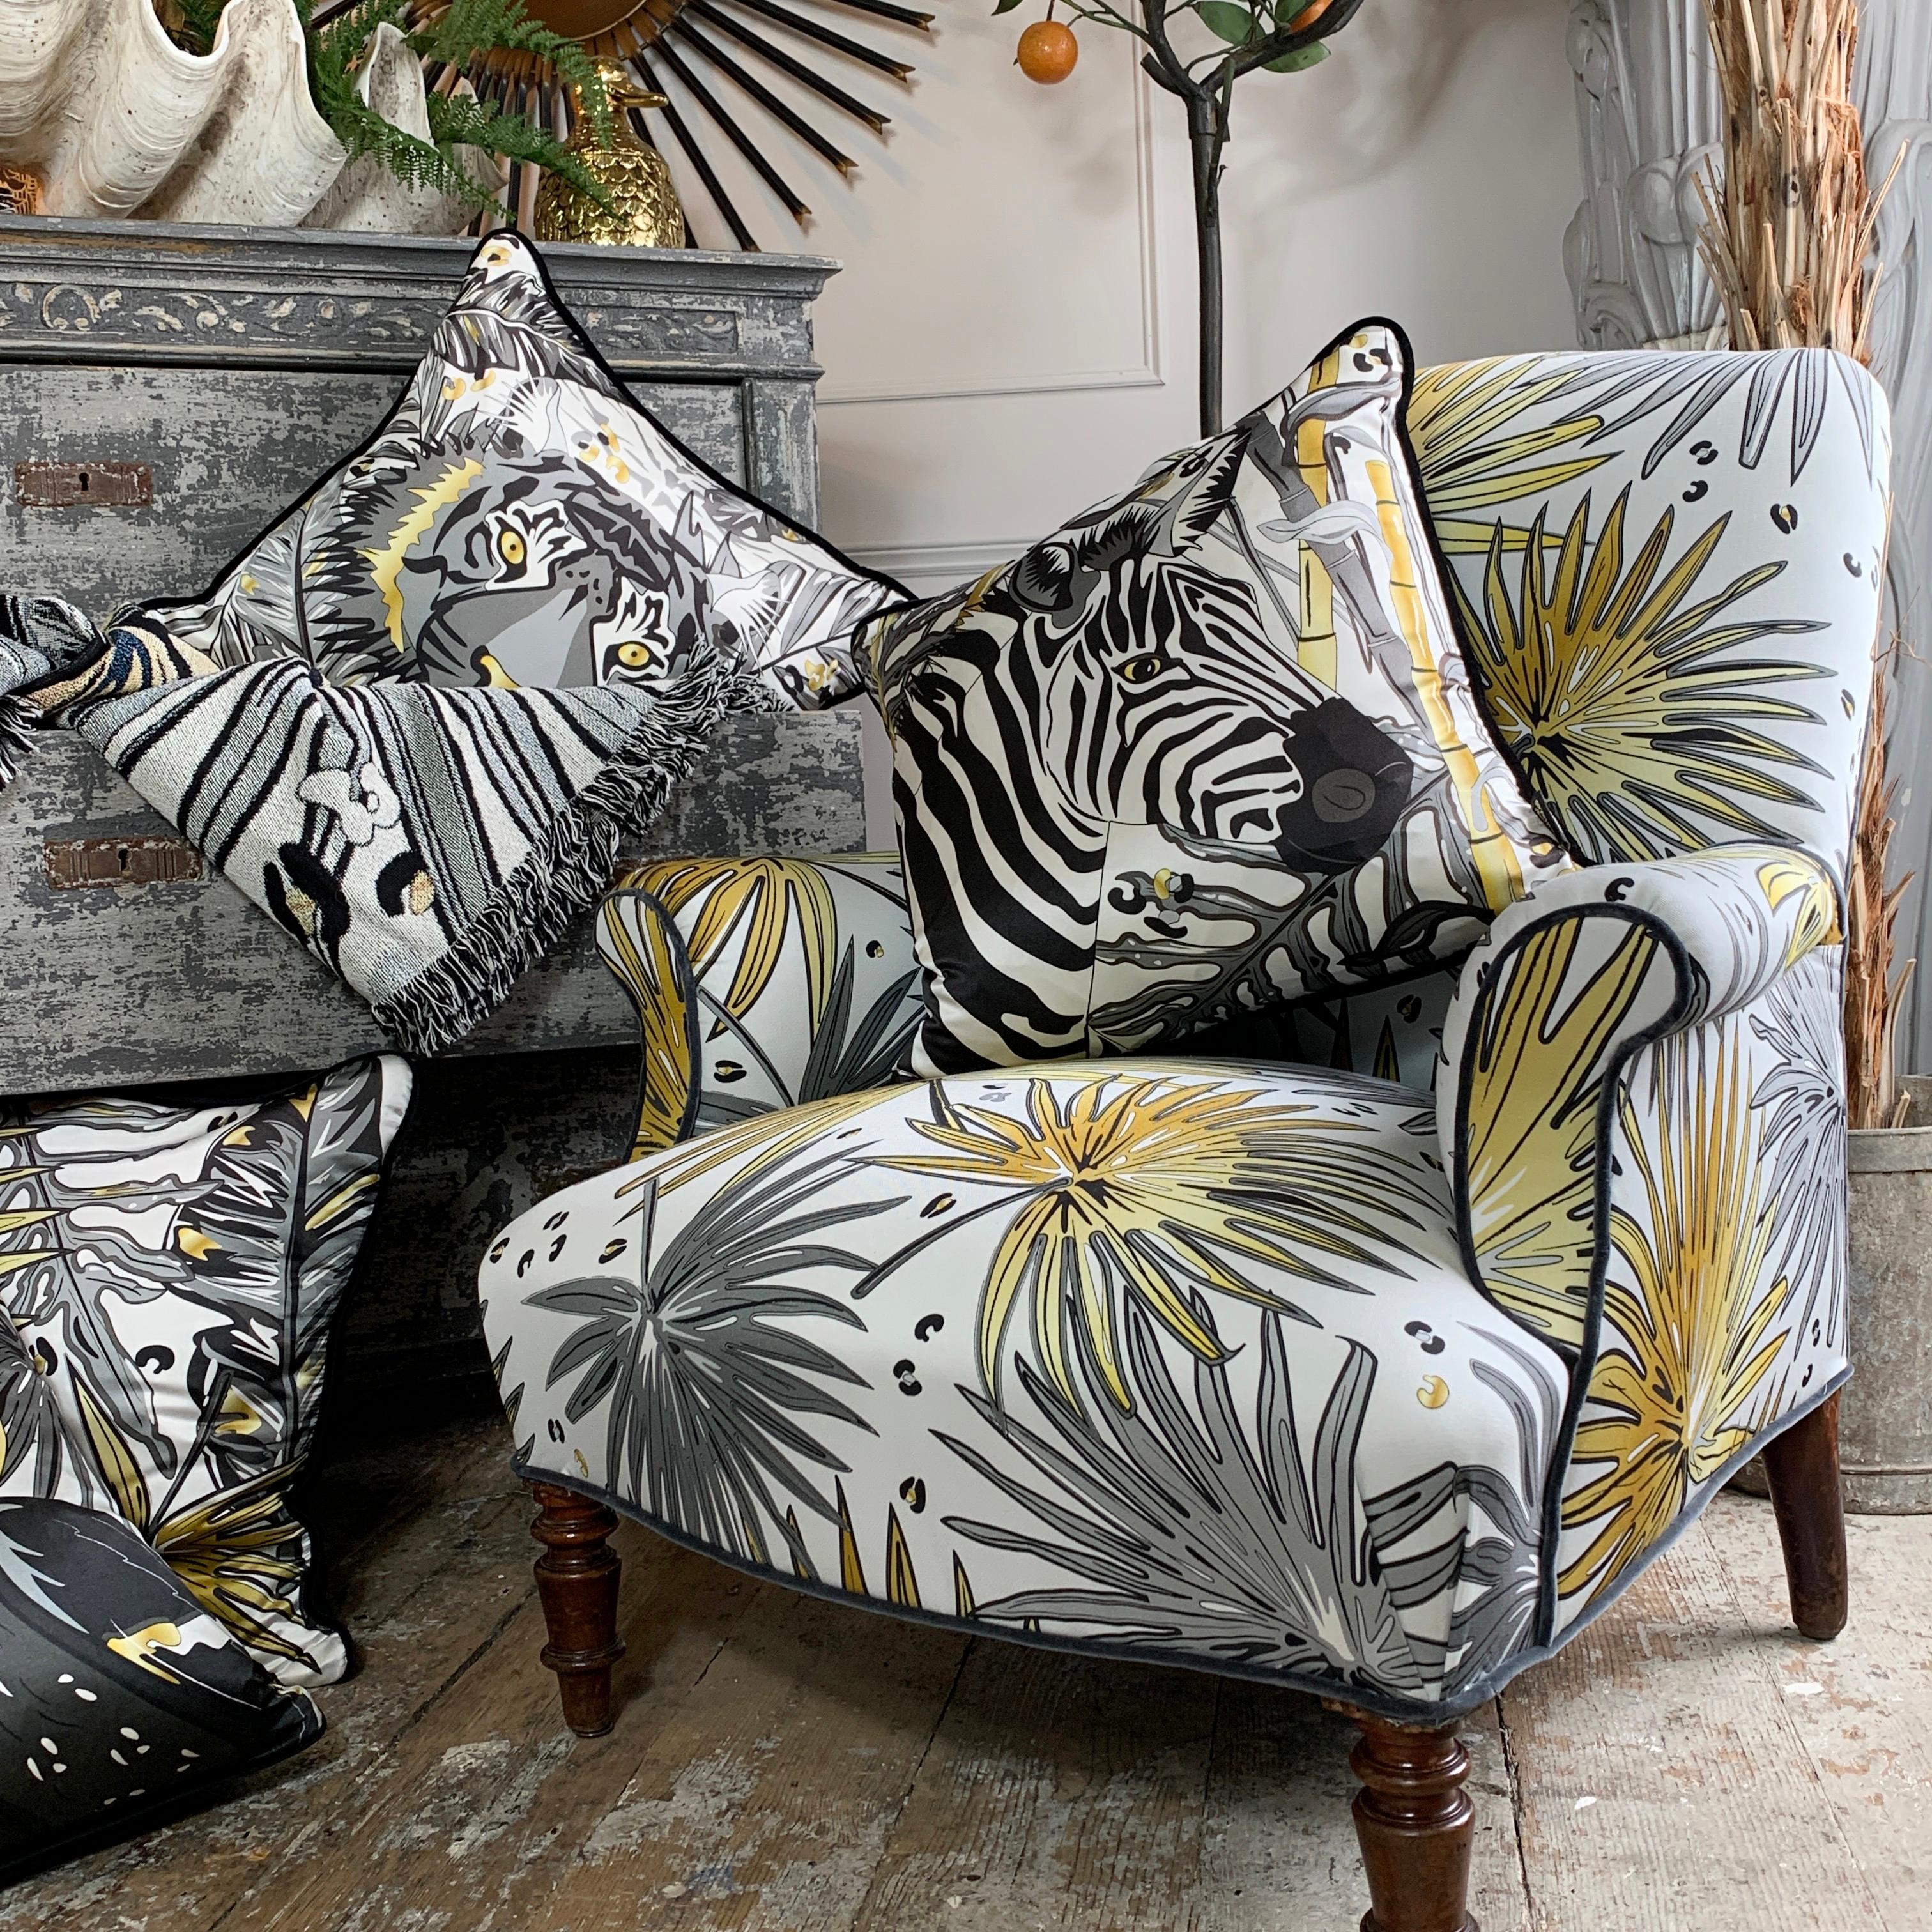 Explore distant savannahs with our luxury silk 'Zebra' cushion from the Tropics range

This luxurious 100% silk cushion has a rich cotton velvet back and piped edge

Designed with inspiration from large lush tropical jungle leaves and one of natures